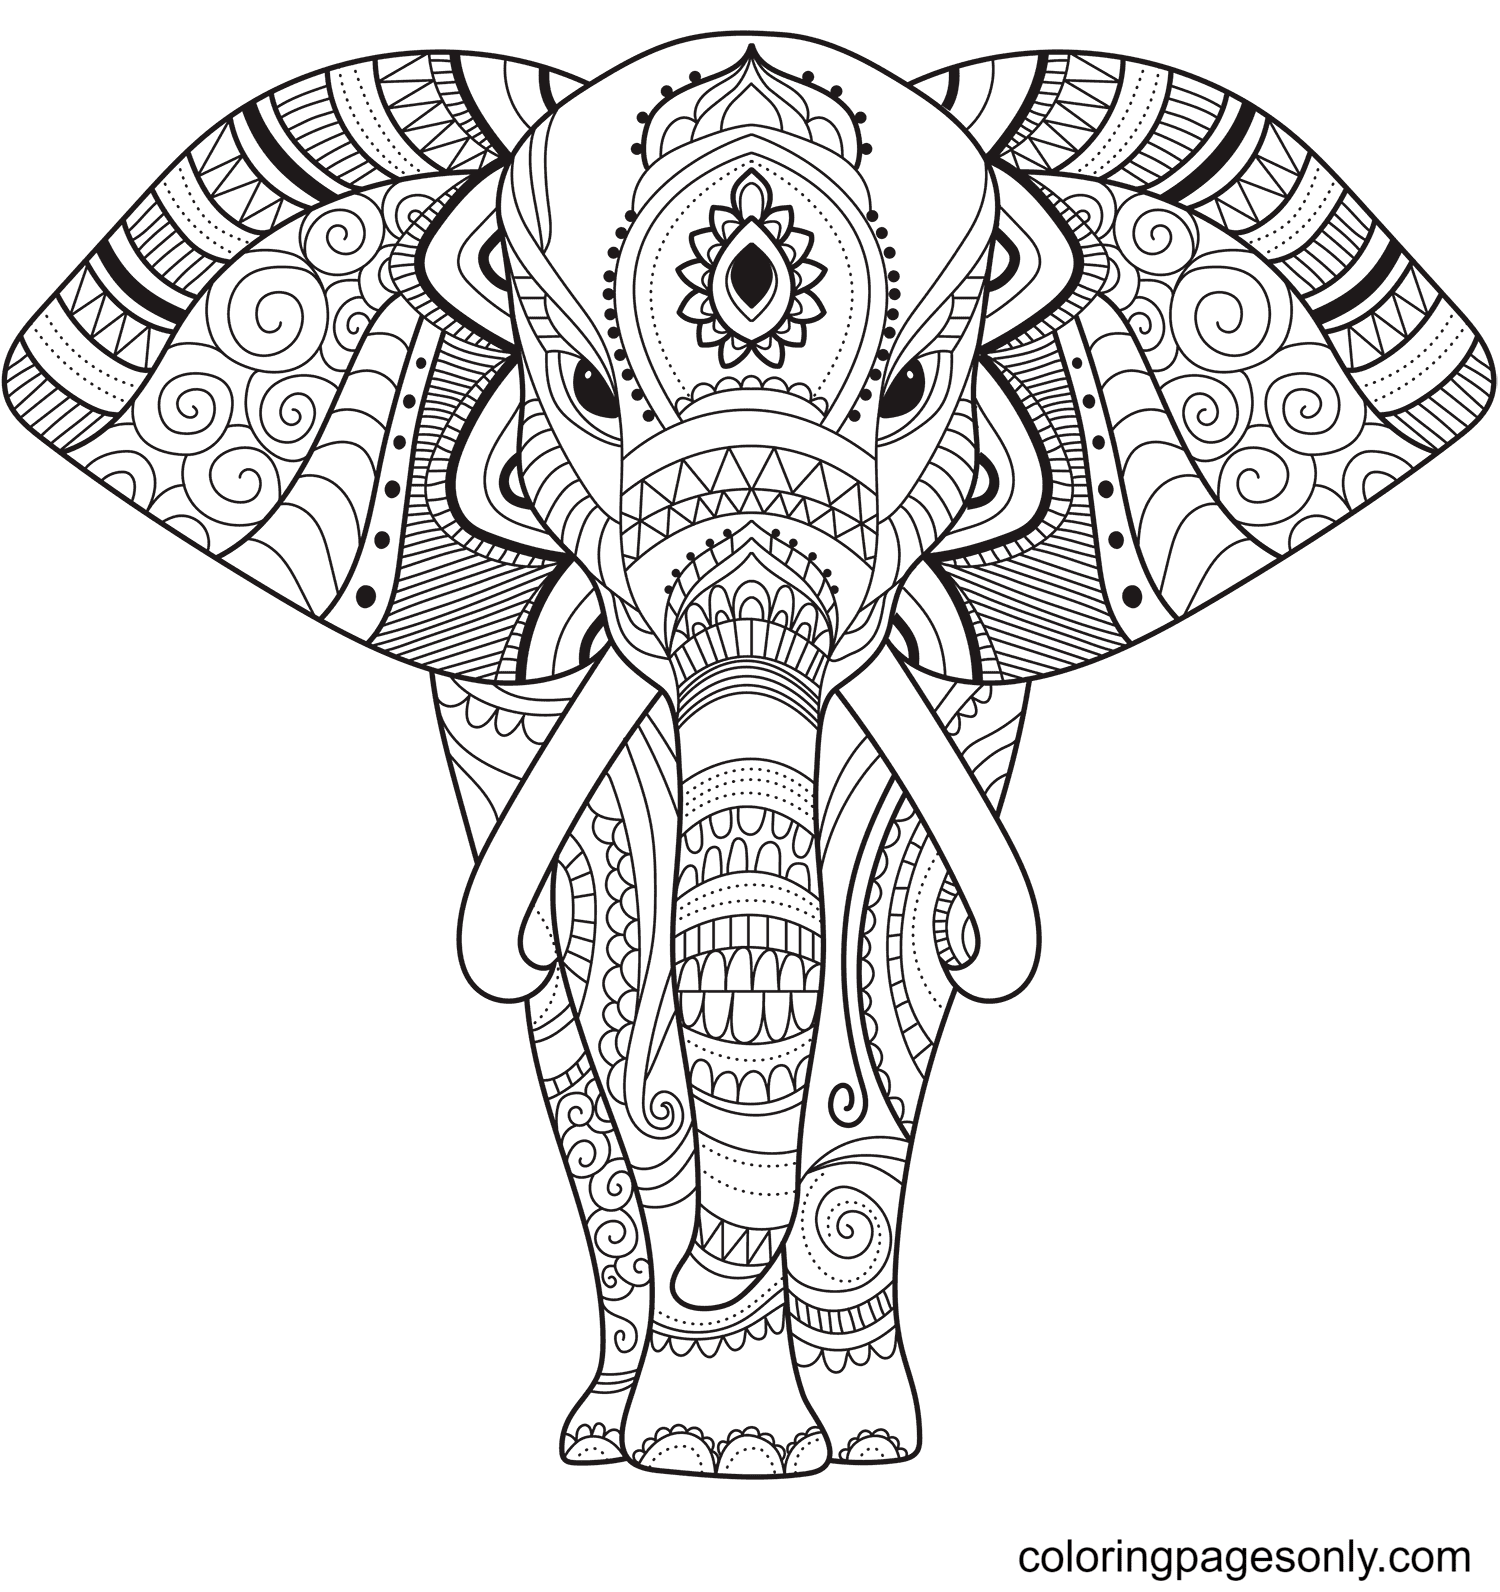 Zentangle Elephant Coloring Pages